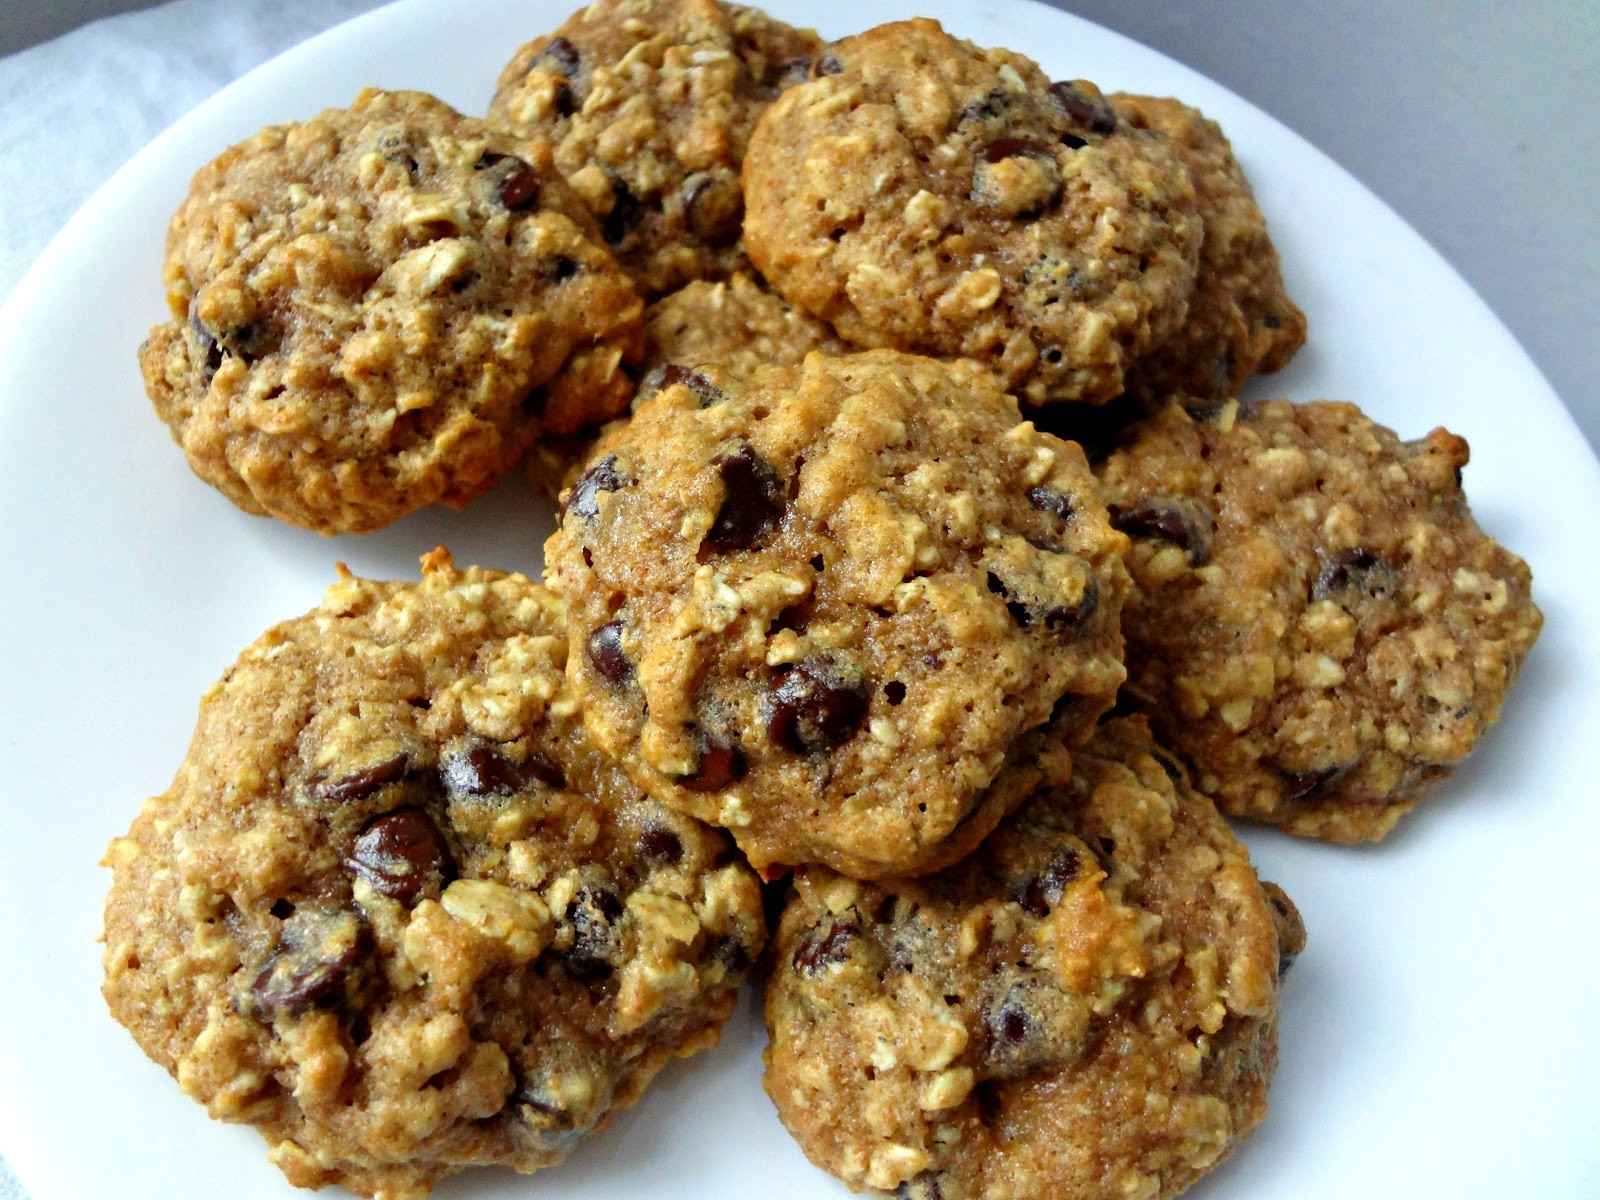 Healthy Chocolate Oatmeal Cookies
 The Cooking Actress Healthy Oatmeal Chocolate Chip Cookies